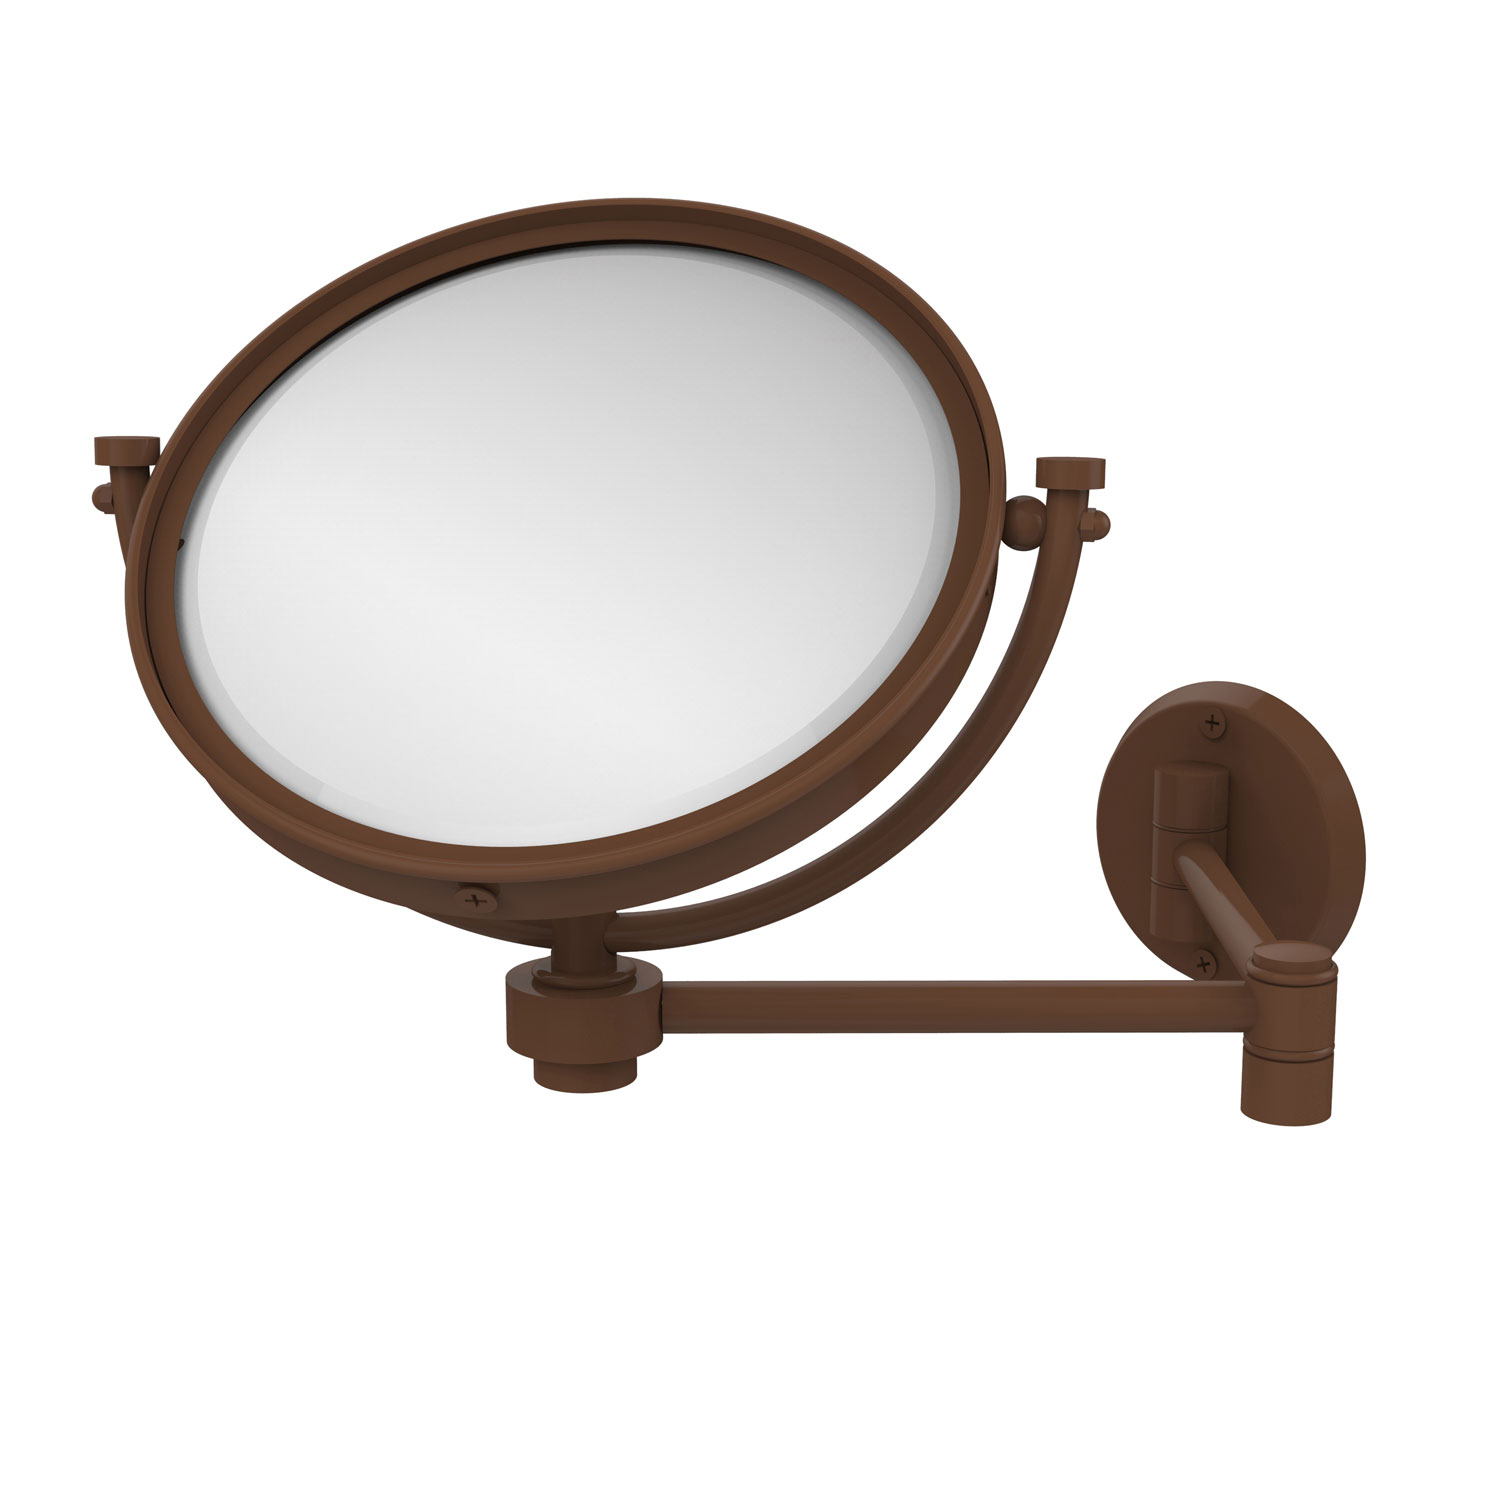 8 Inch Wall Mounted Extending Make-Up Mirror 3X Magnification, Antique Bronze